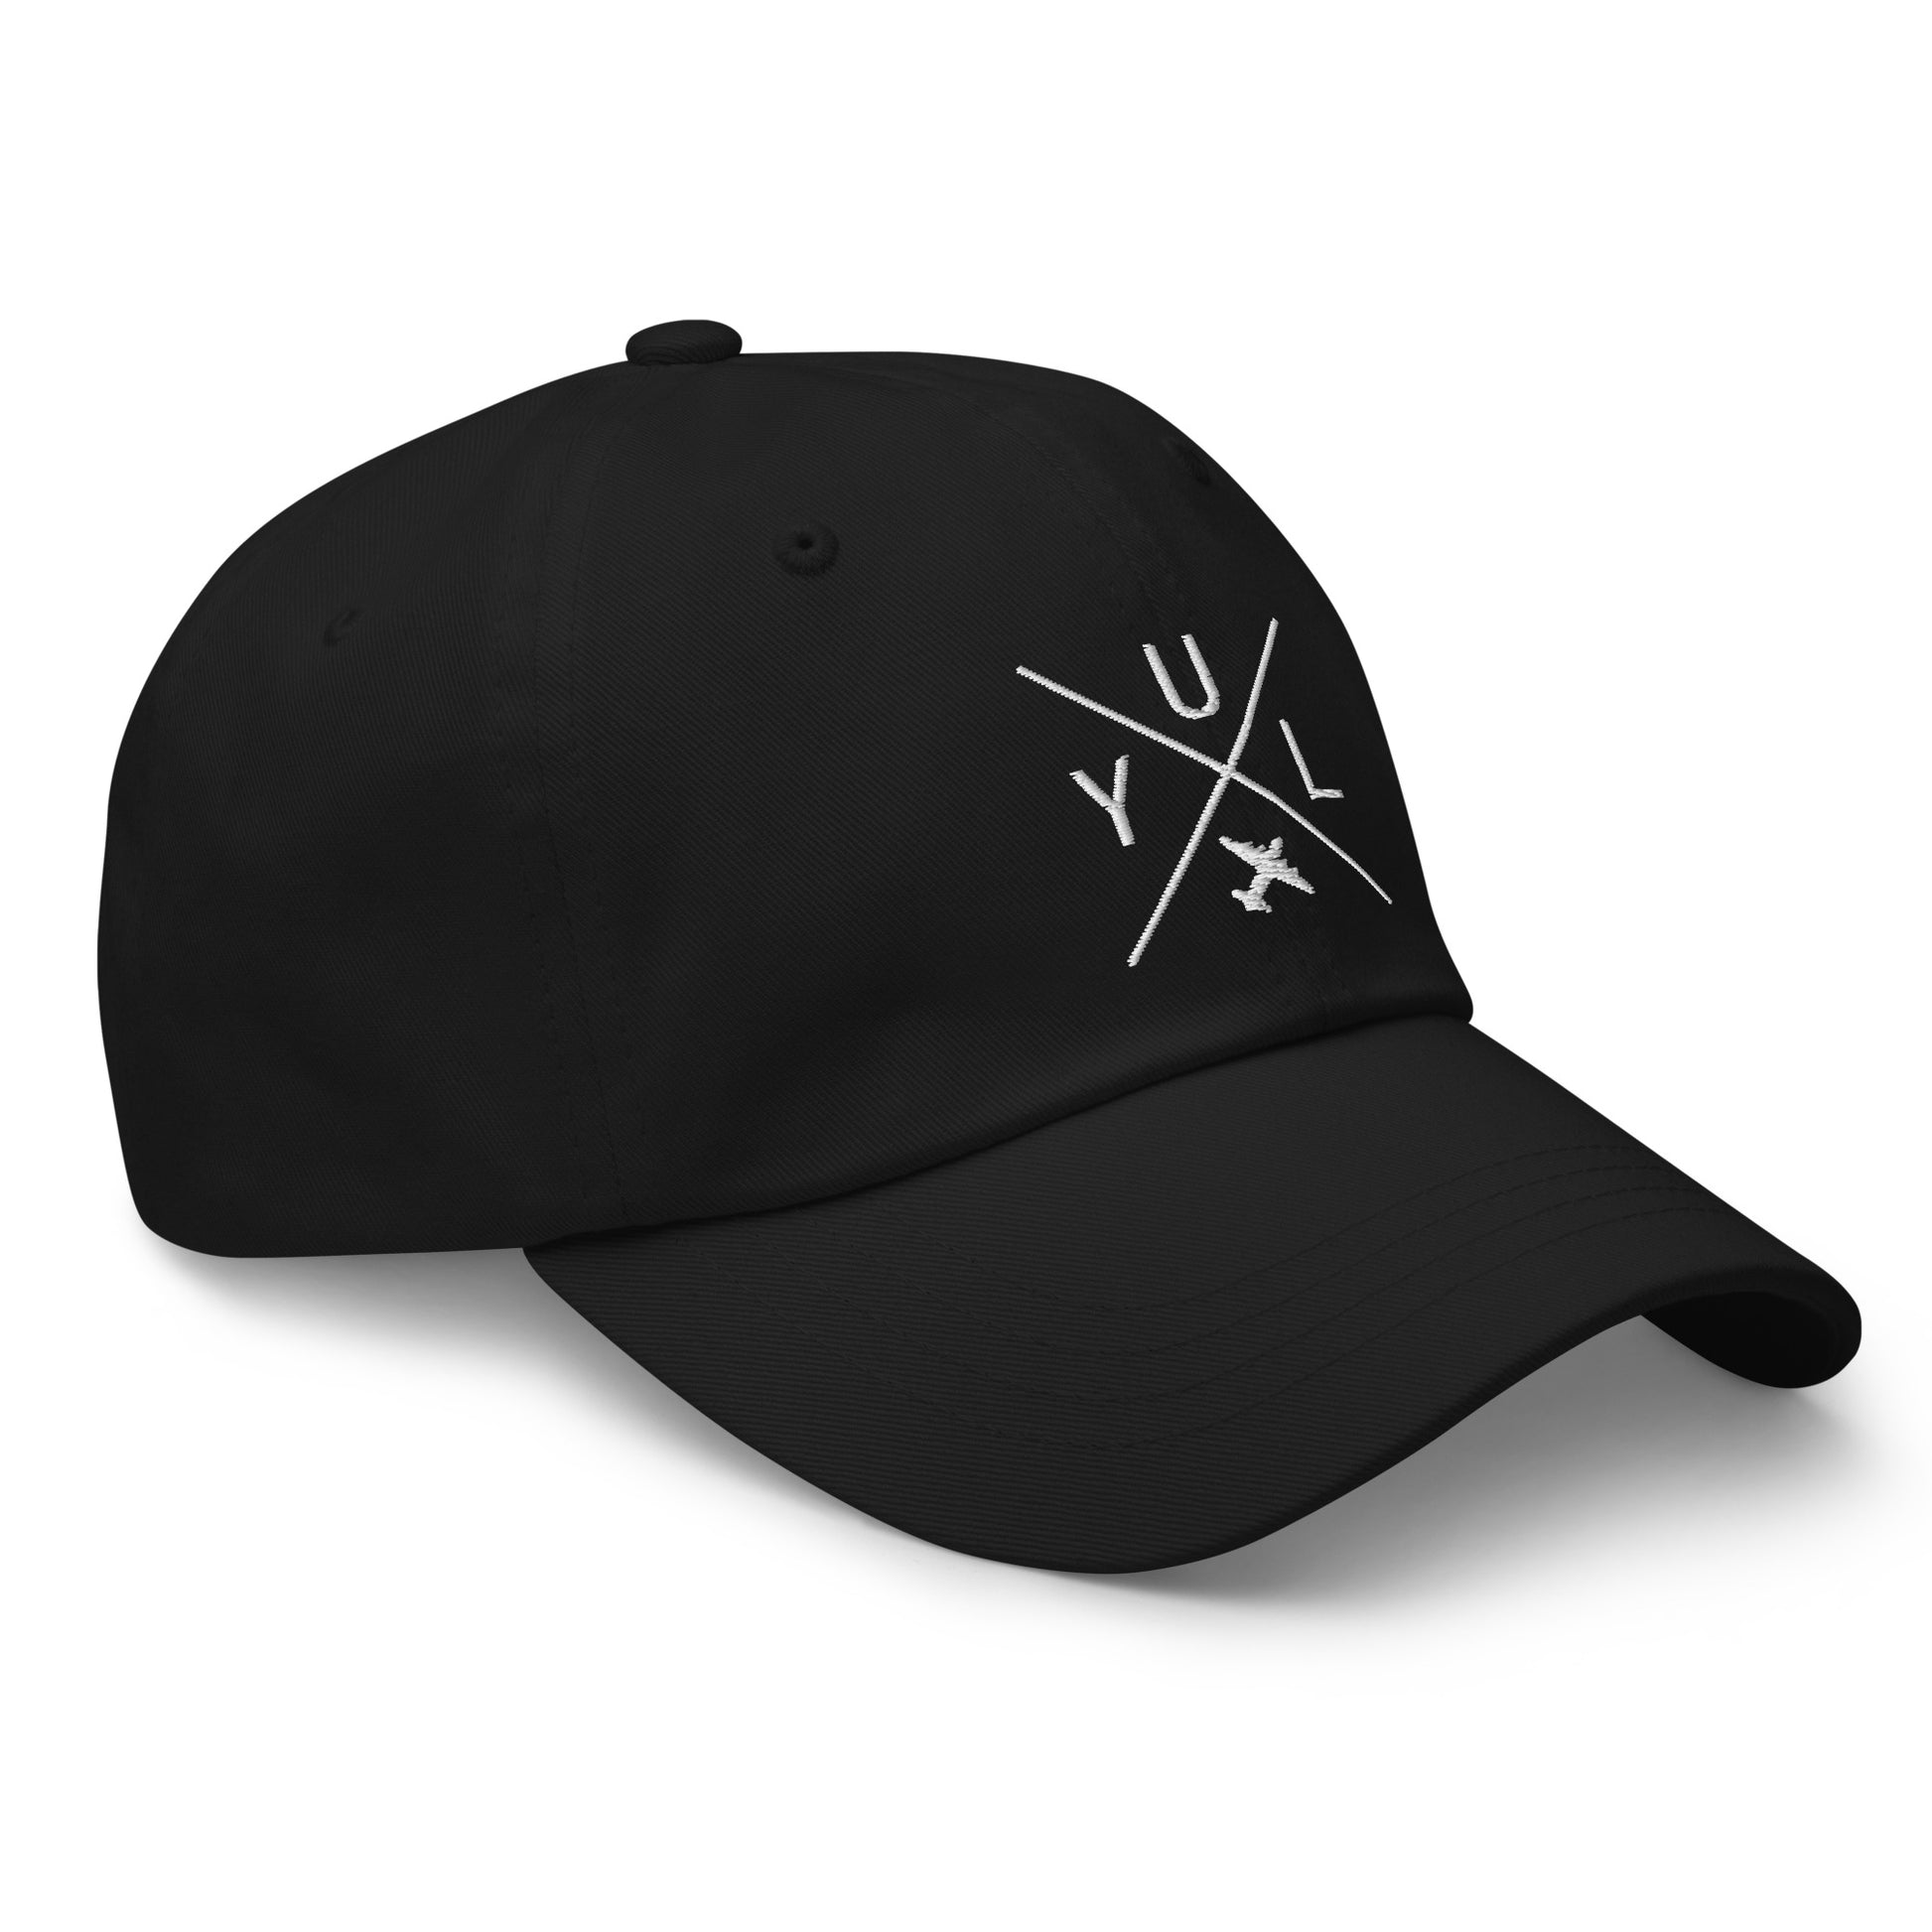 Crossed-X Dad Hat - White • YUL Montreal • YHM Designs - Image 11